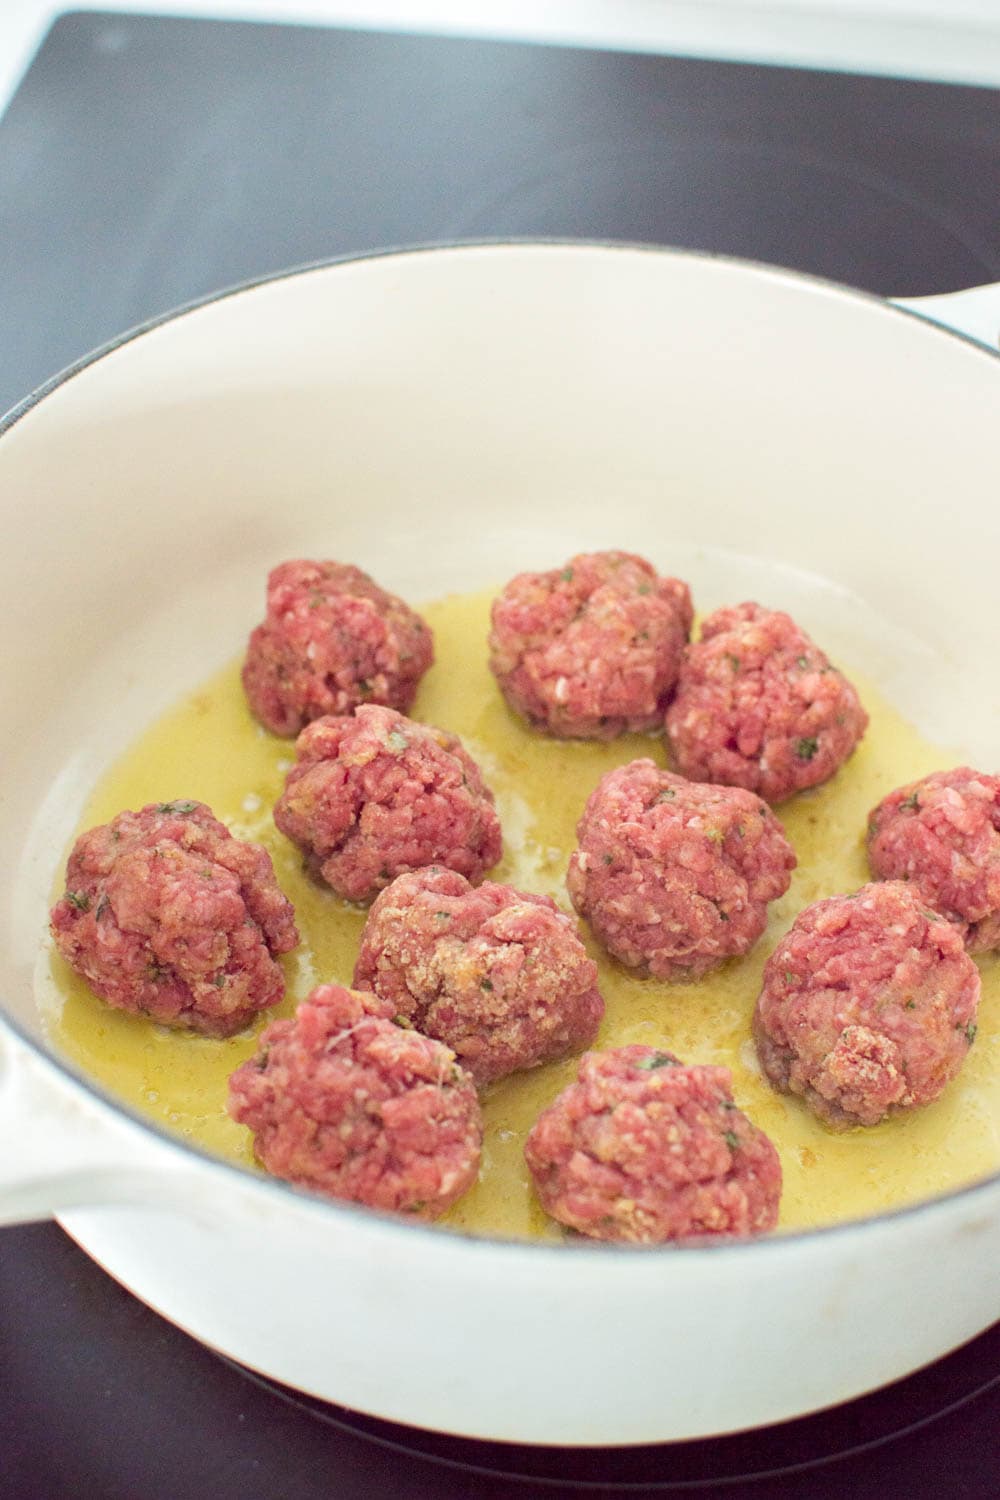 Browning meatballs in a large skillet